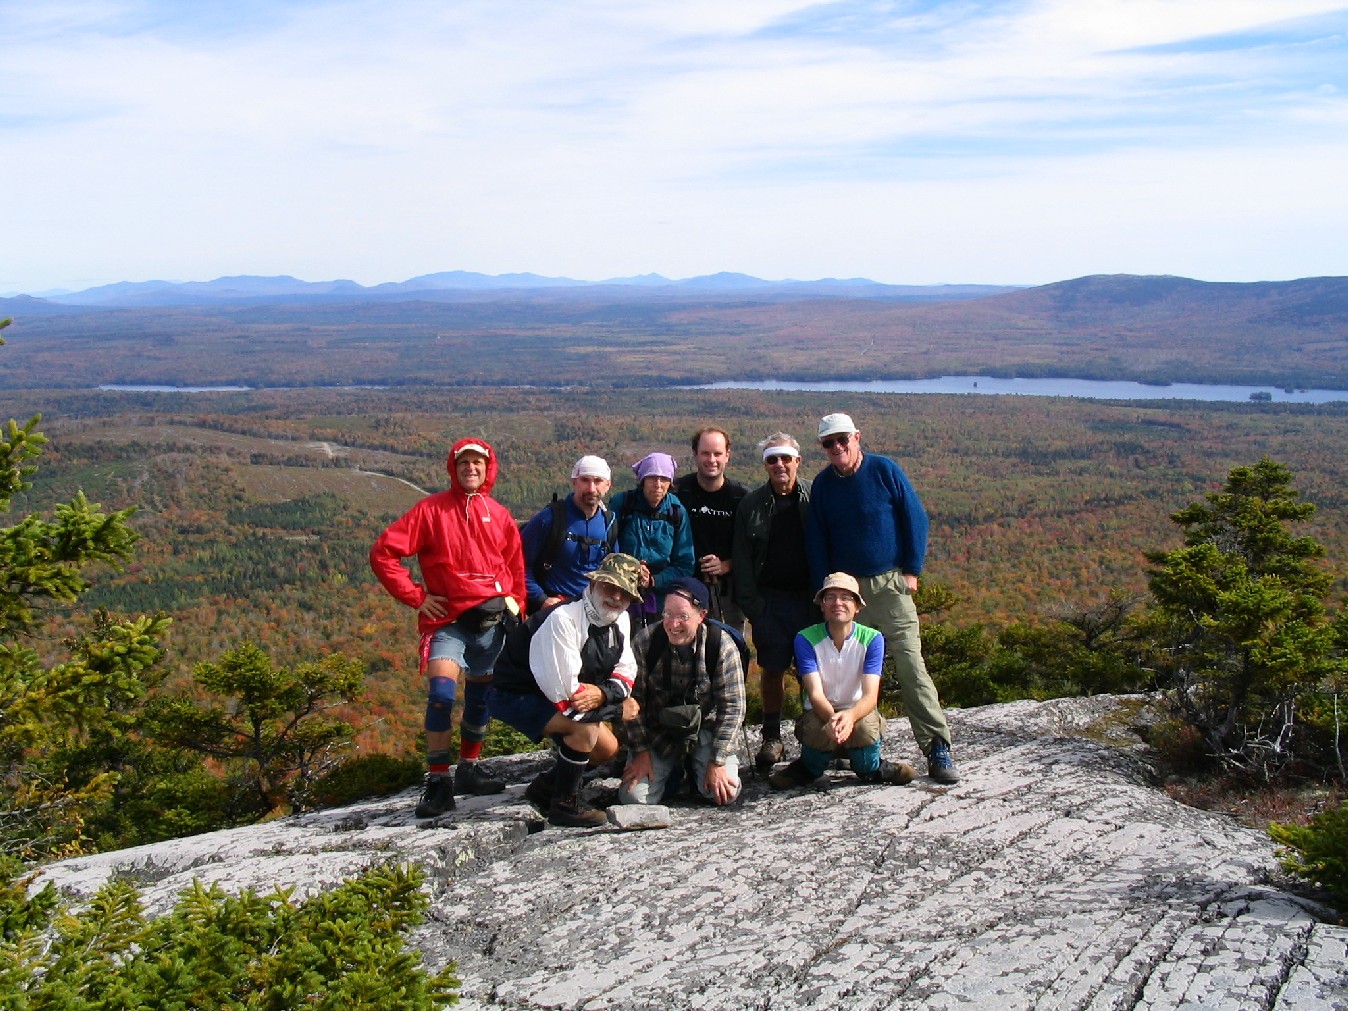 29.7 MM. Here we are at the summit of Pleasant Pond Mountain looking back and down at Moxie Pond. Front row - Dean Gletsos, Aaron Schoenberg, Chris Senko. Back row - Ludwig Hendel, David Kahan, Veronica Cilich, Josh Davis, George Sheedy and George Perkinson. Courtesy askus3@optonline.net